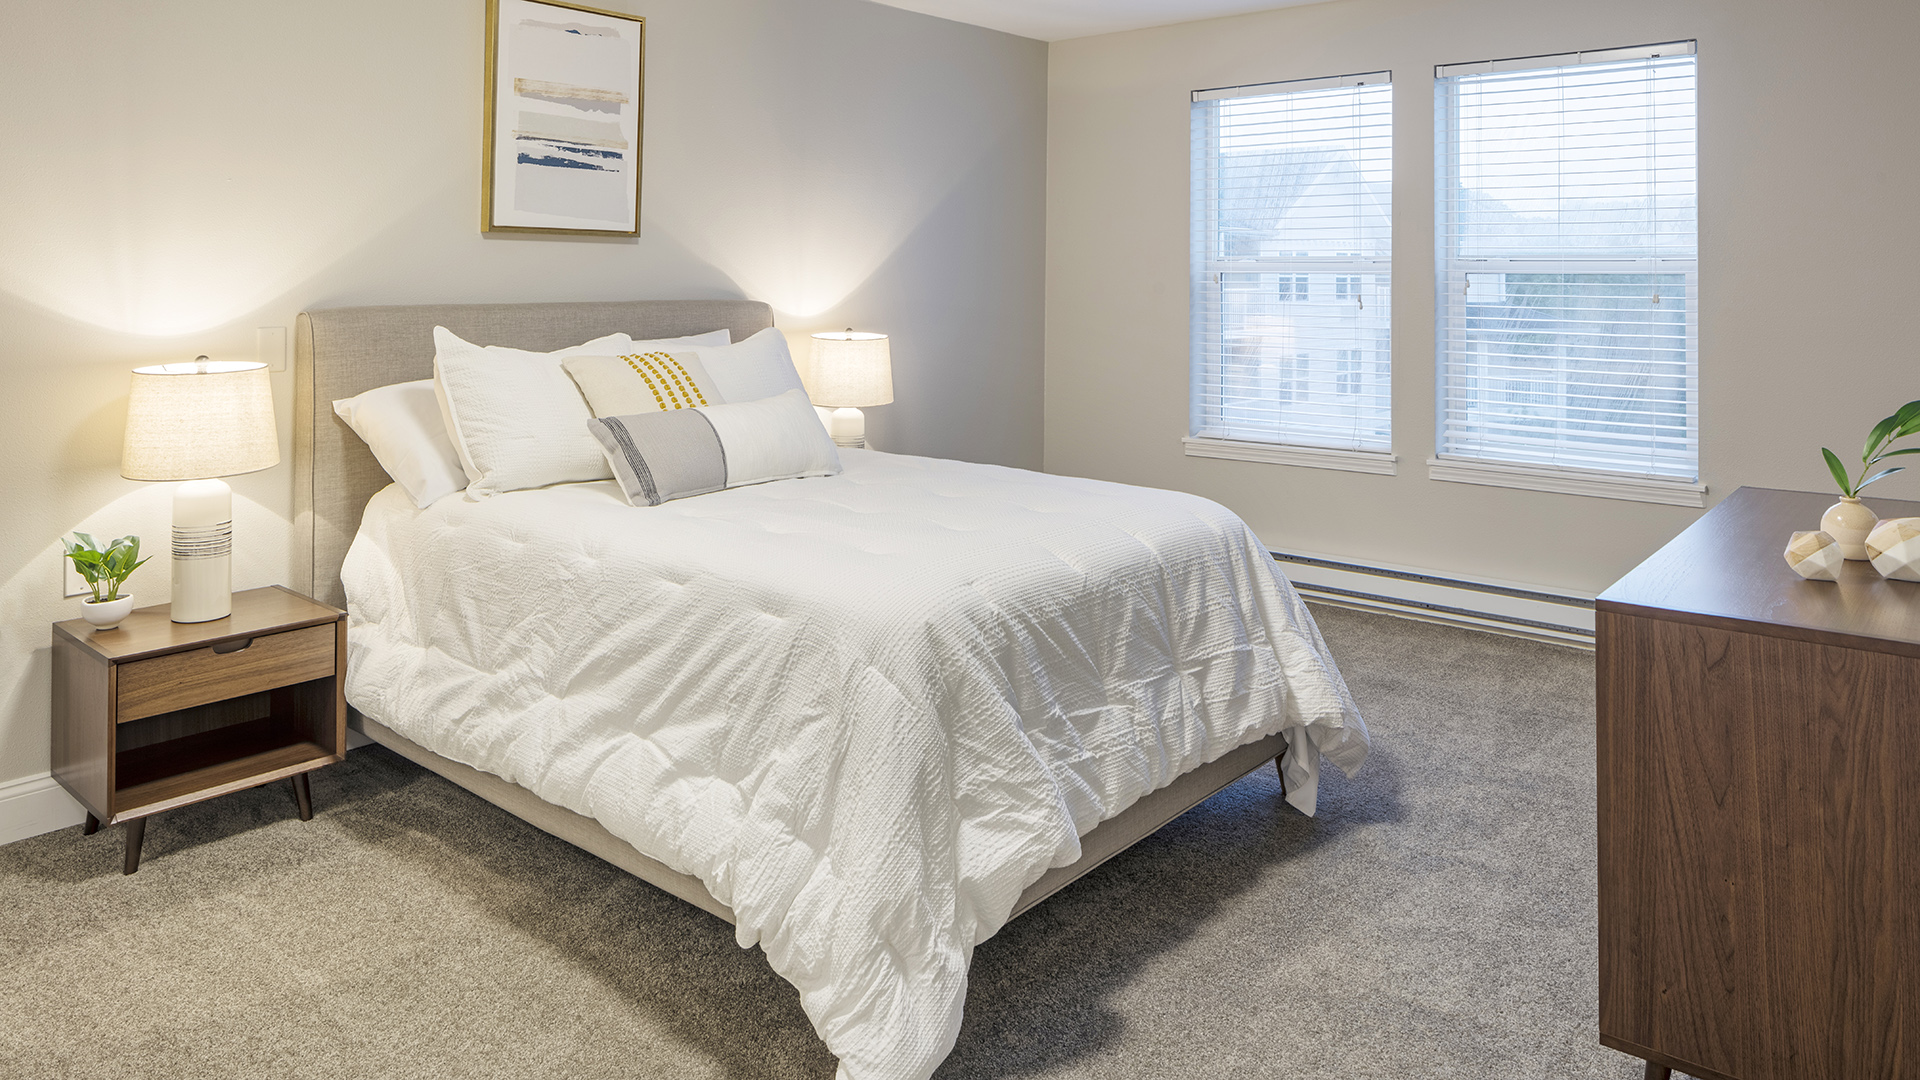 Holiday White Oaks apartment bedroom with queen sized bed and bedside tables